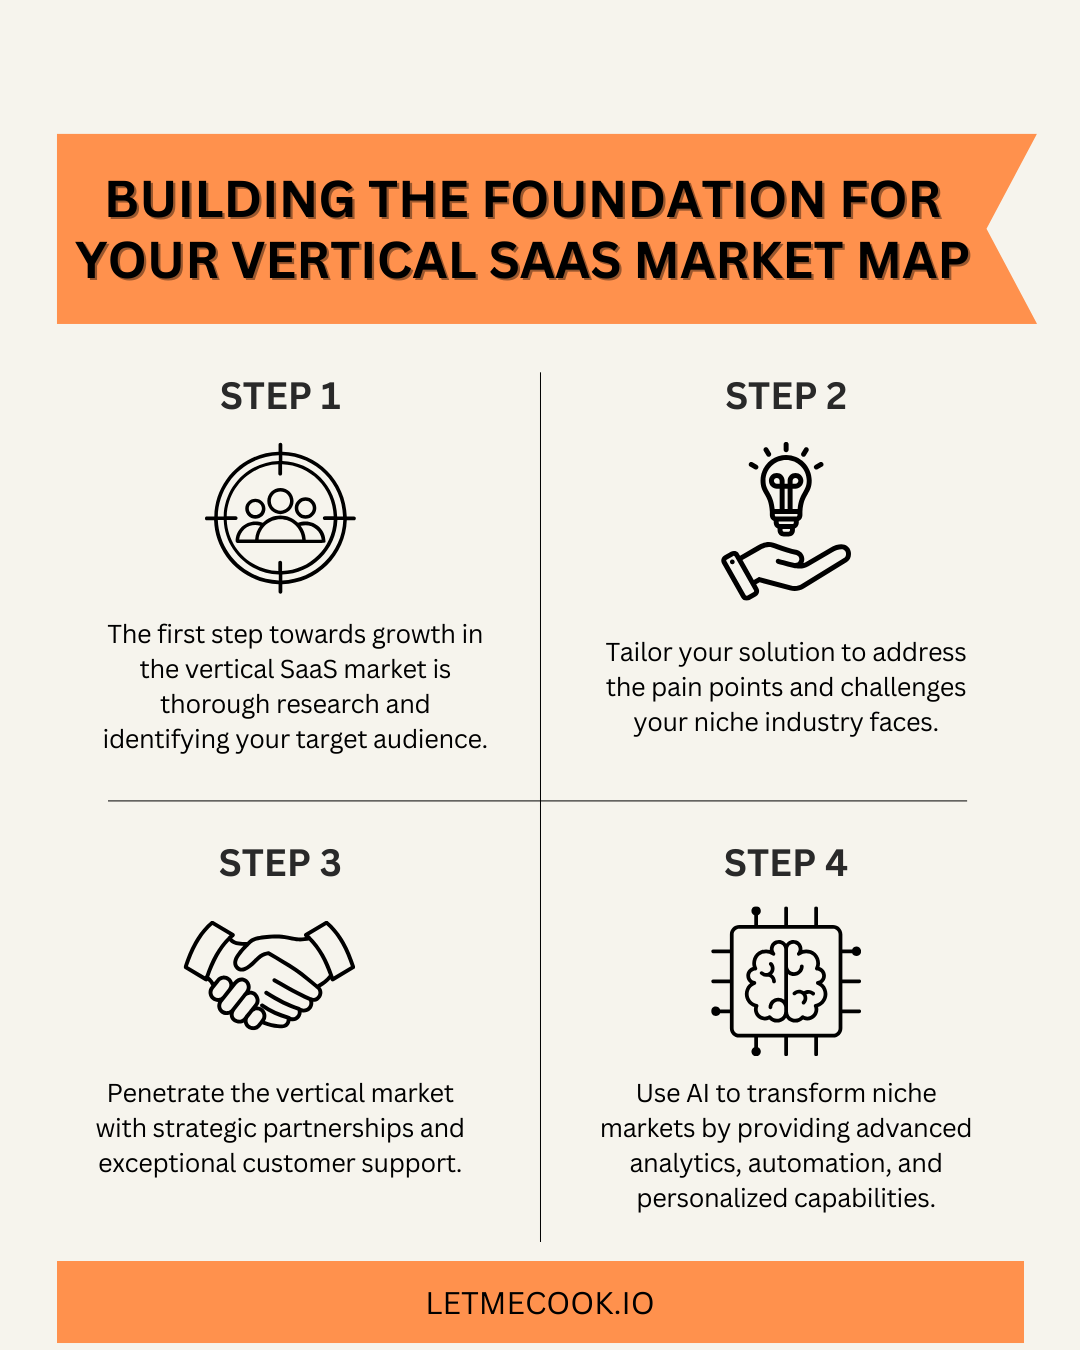 Here are the 4 steps to building the foundation for your vertical SaaS market map. Read the full article for more helpful information to understand and create your vertical SaaS market map for growth and success.